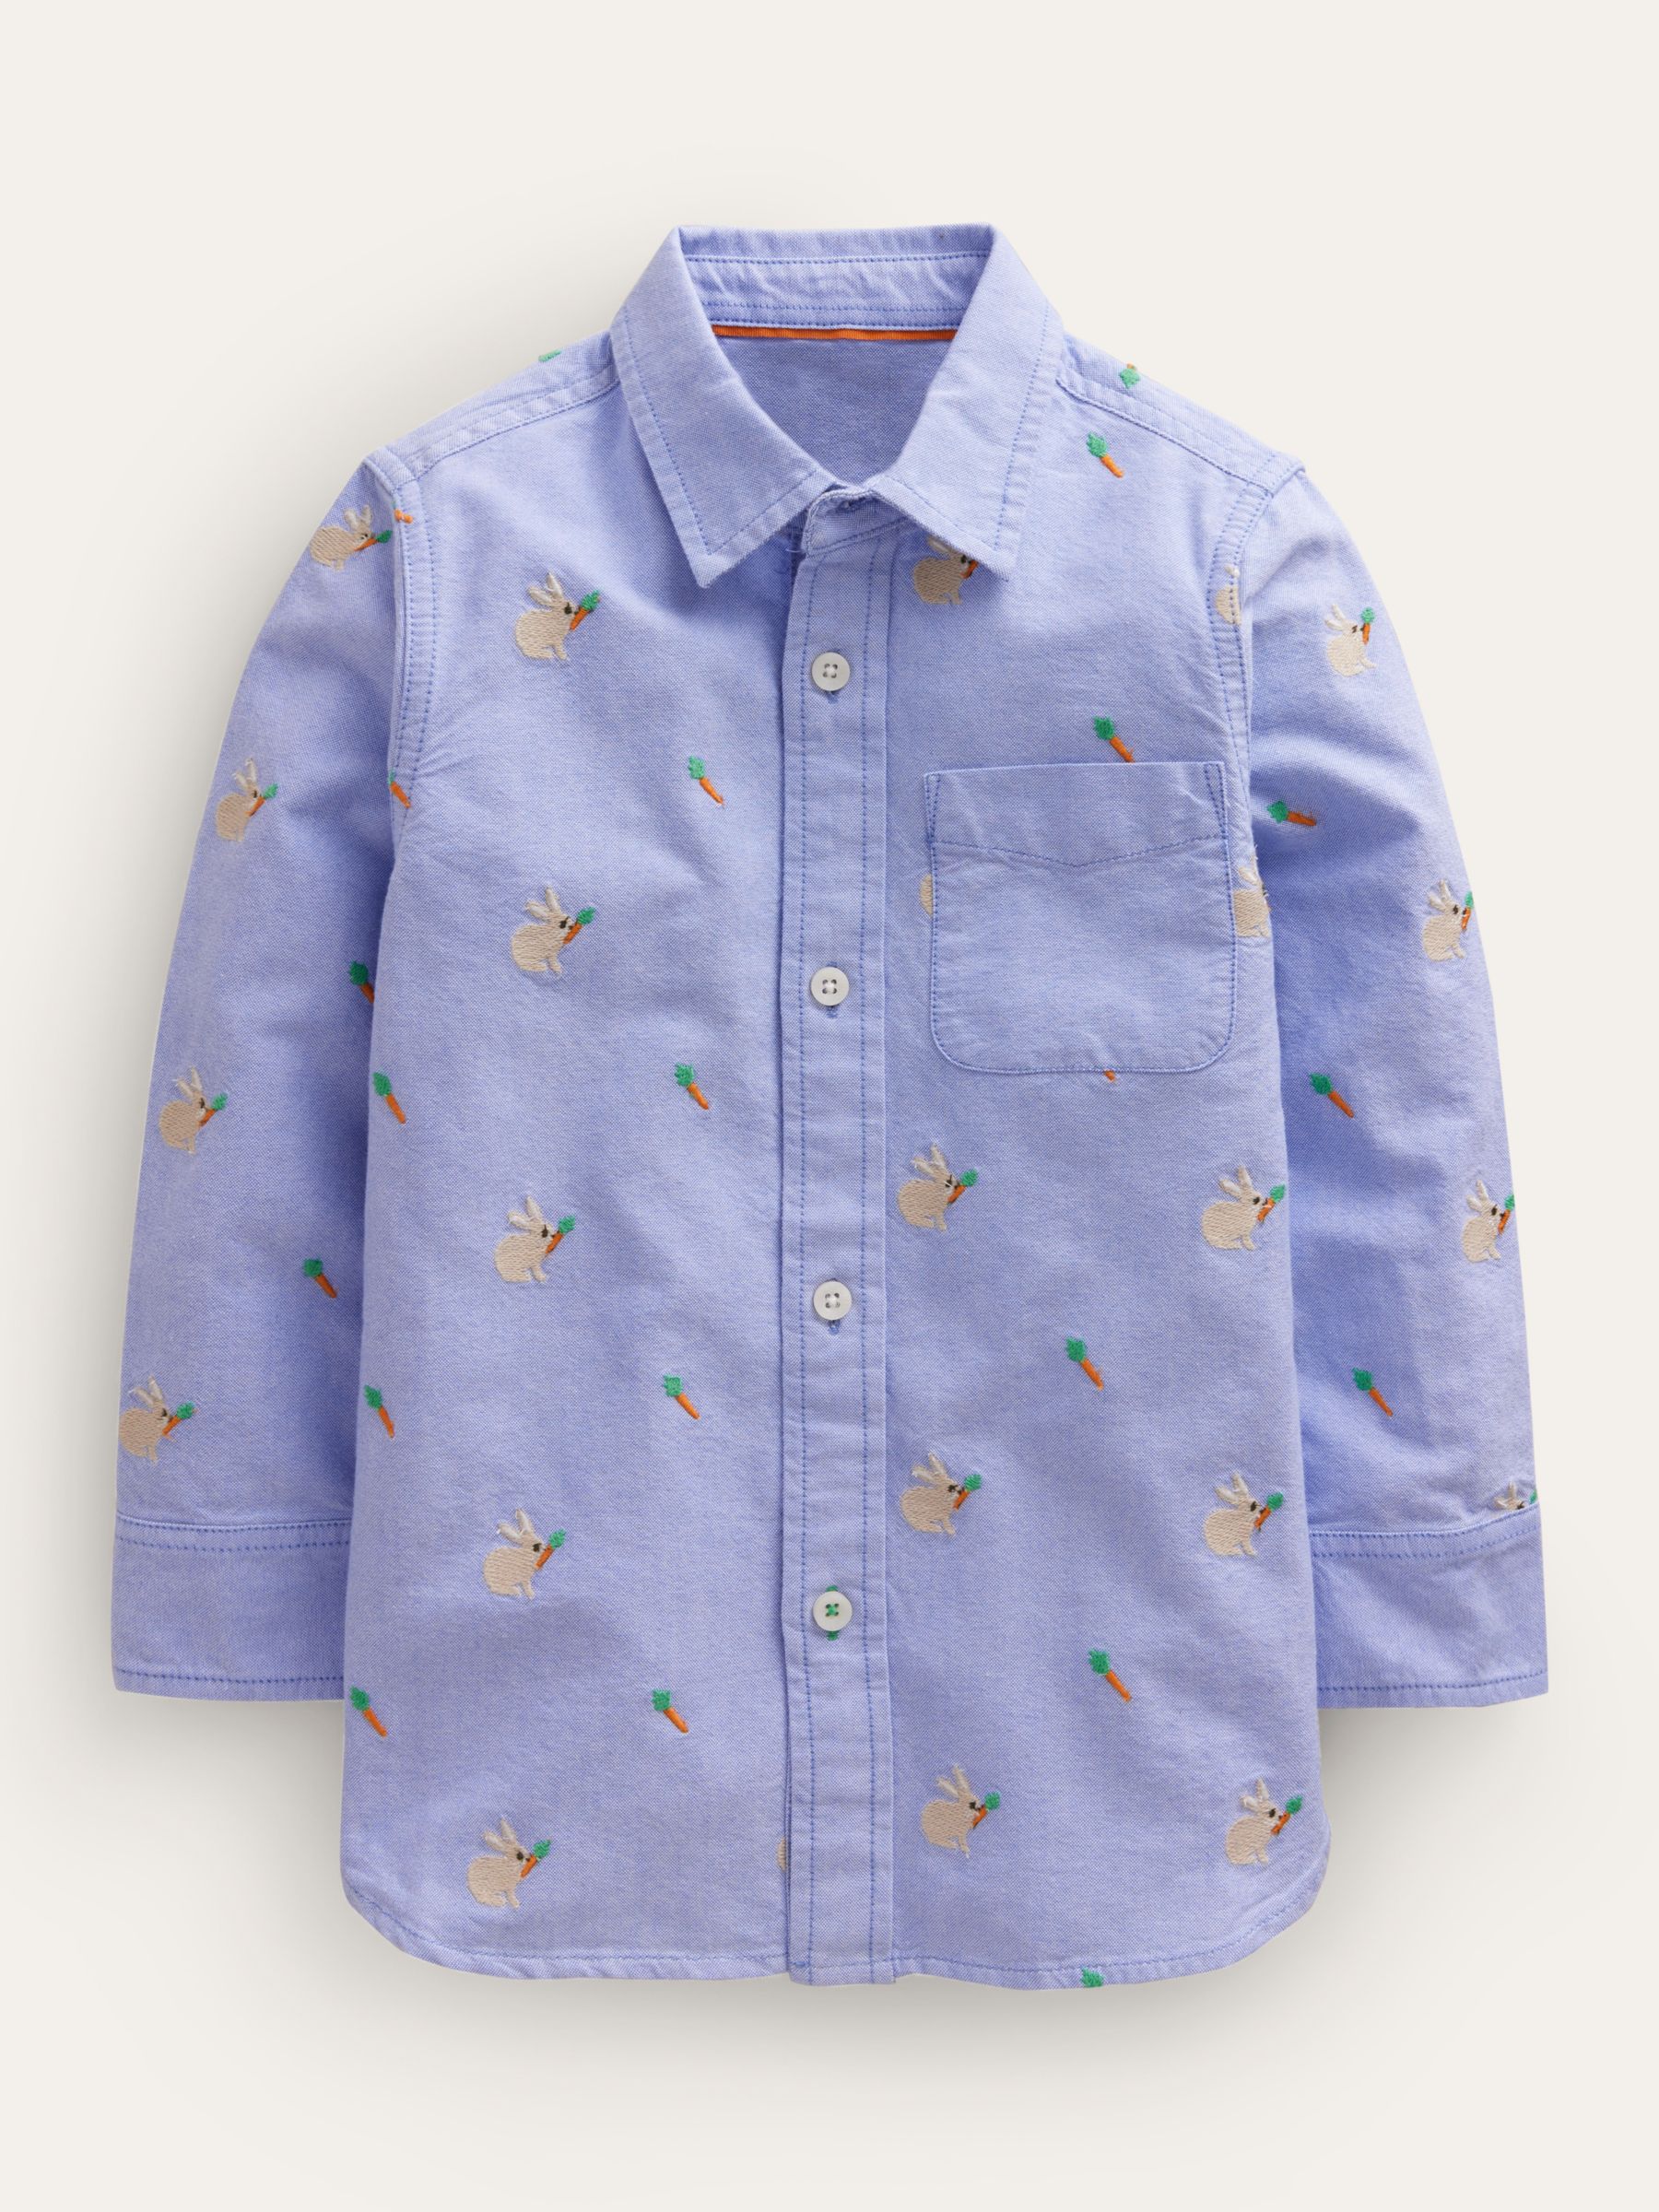 Mini Boden Kids' Embroidered Bunny Oxford Shirt, Blue, 4-5 years